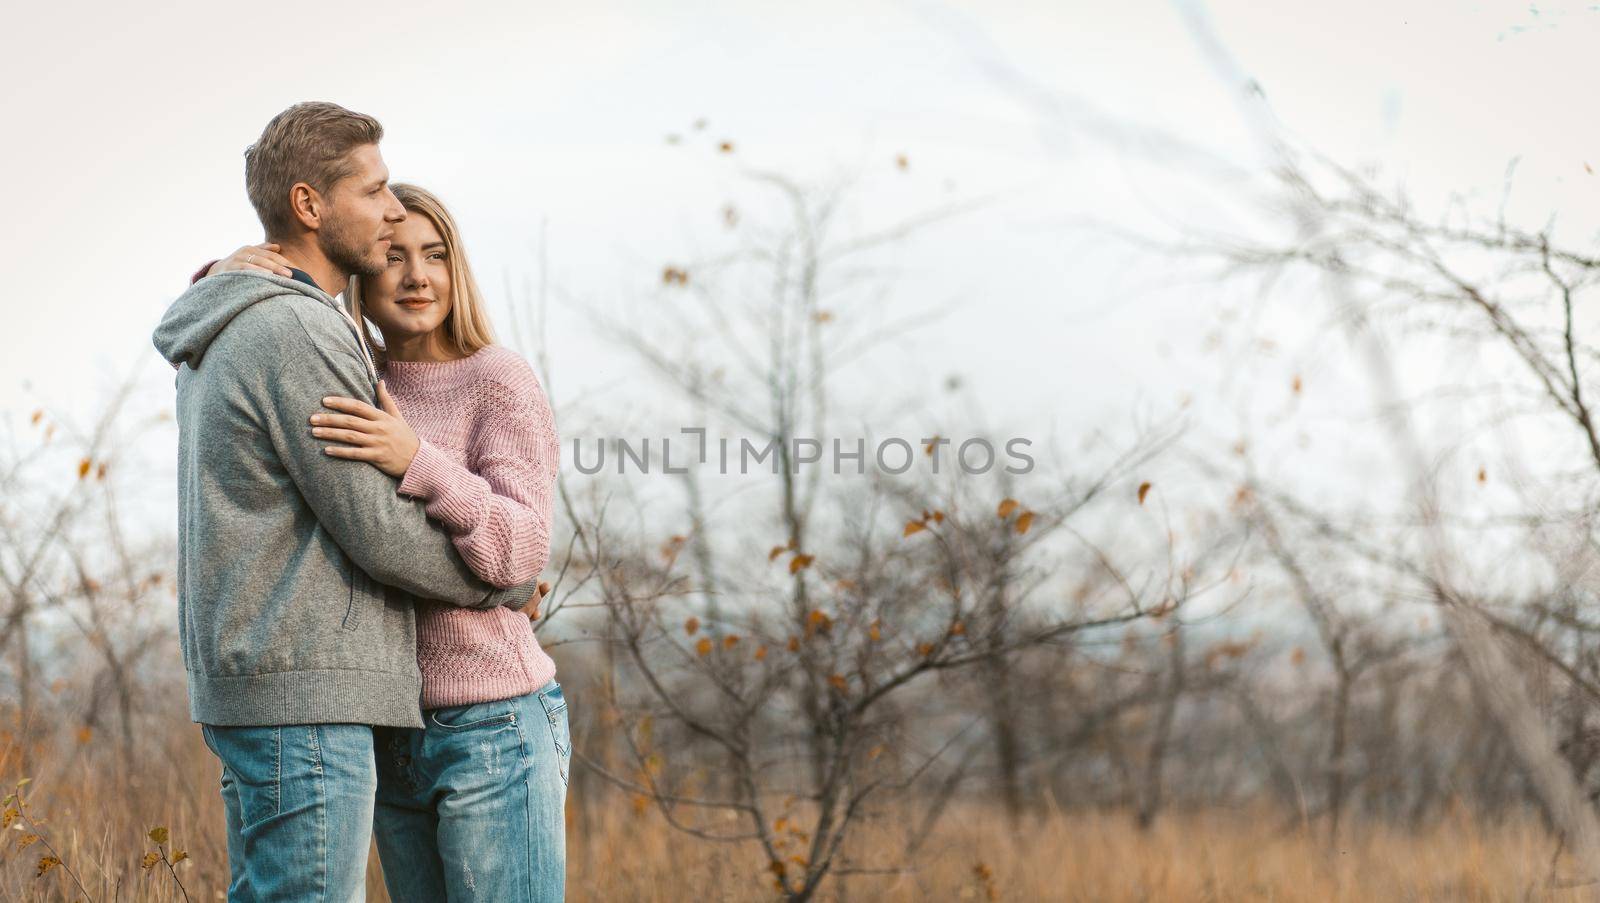 Loving couple resting while standing embracing on a background of autumn natural landscape. Young caucasian man and woman hugging on blurred young forest background. Copy space on the right side.